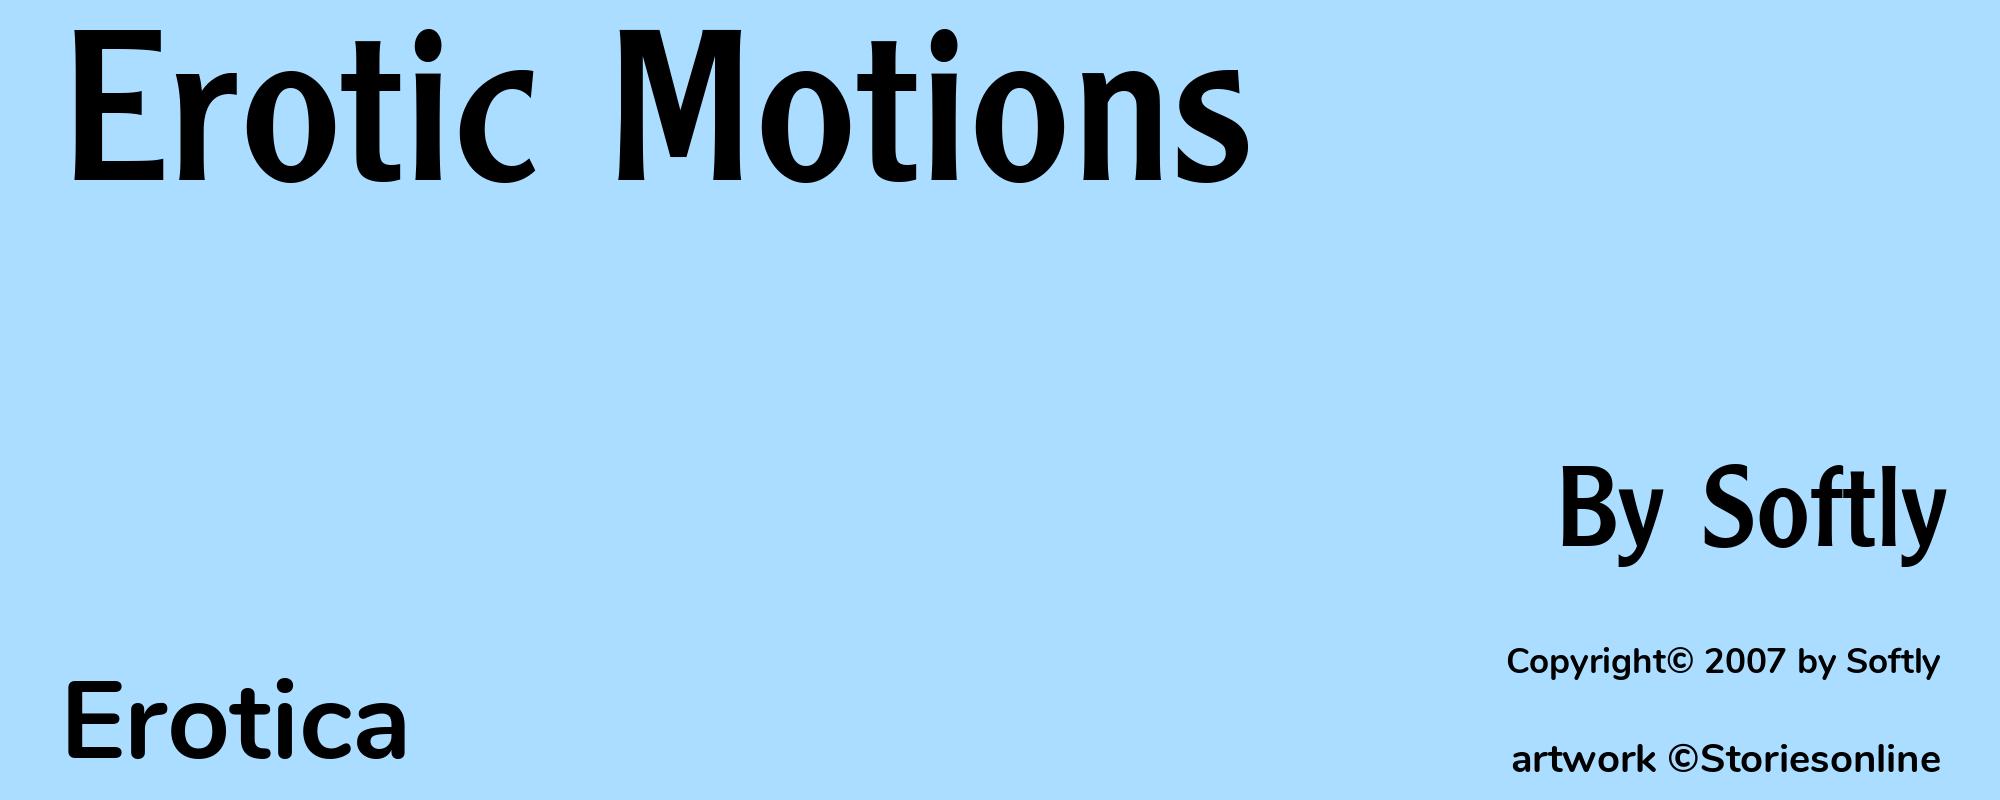 Erotic Motions - Cover